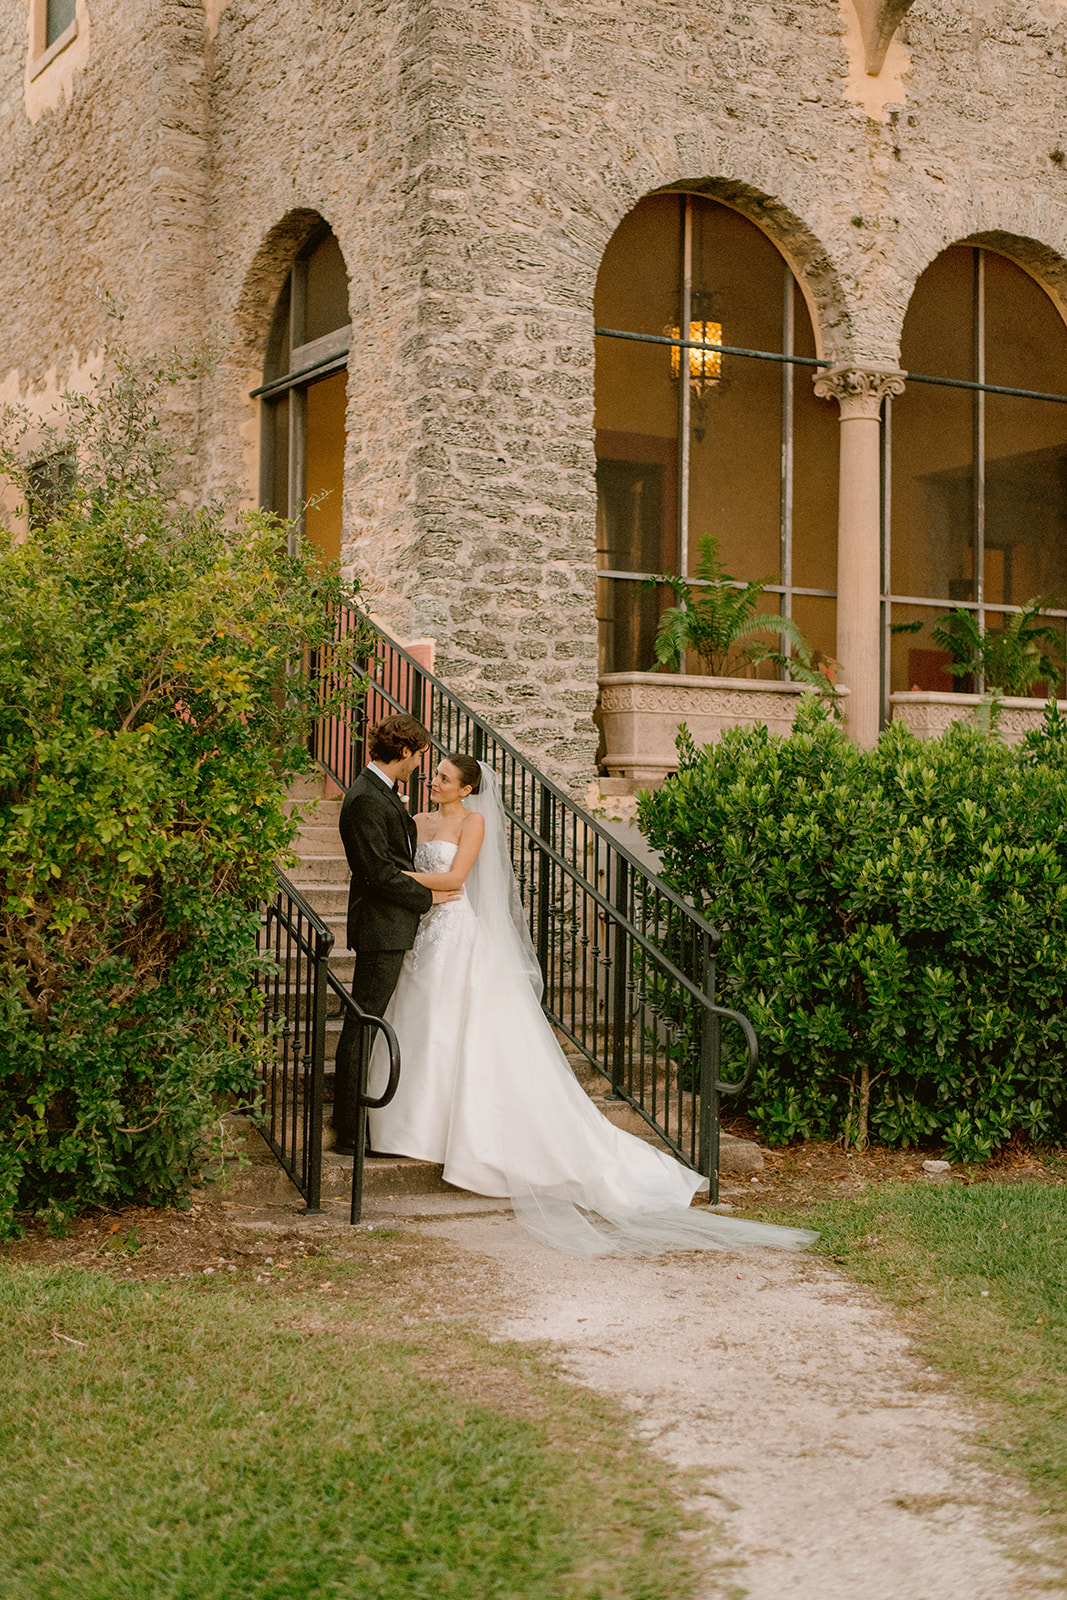 A perfect day captured by Miami Florida's best wedding photographer
